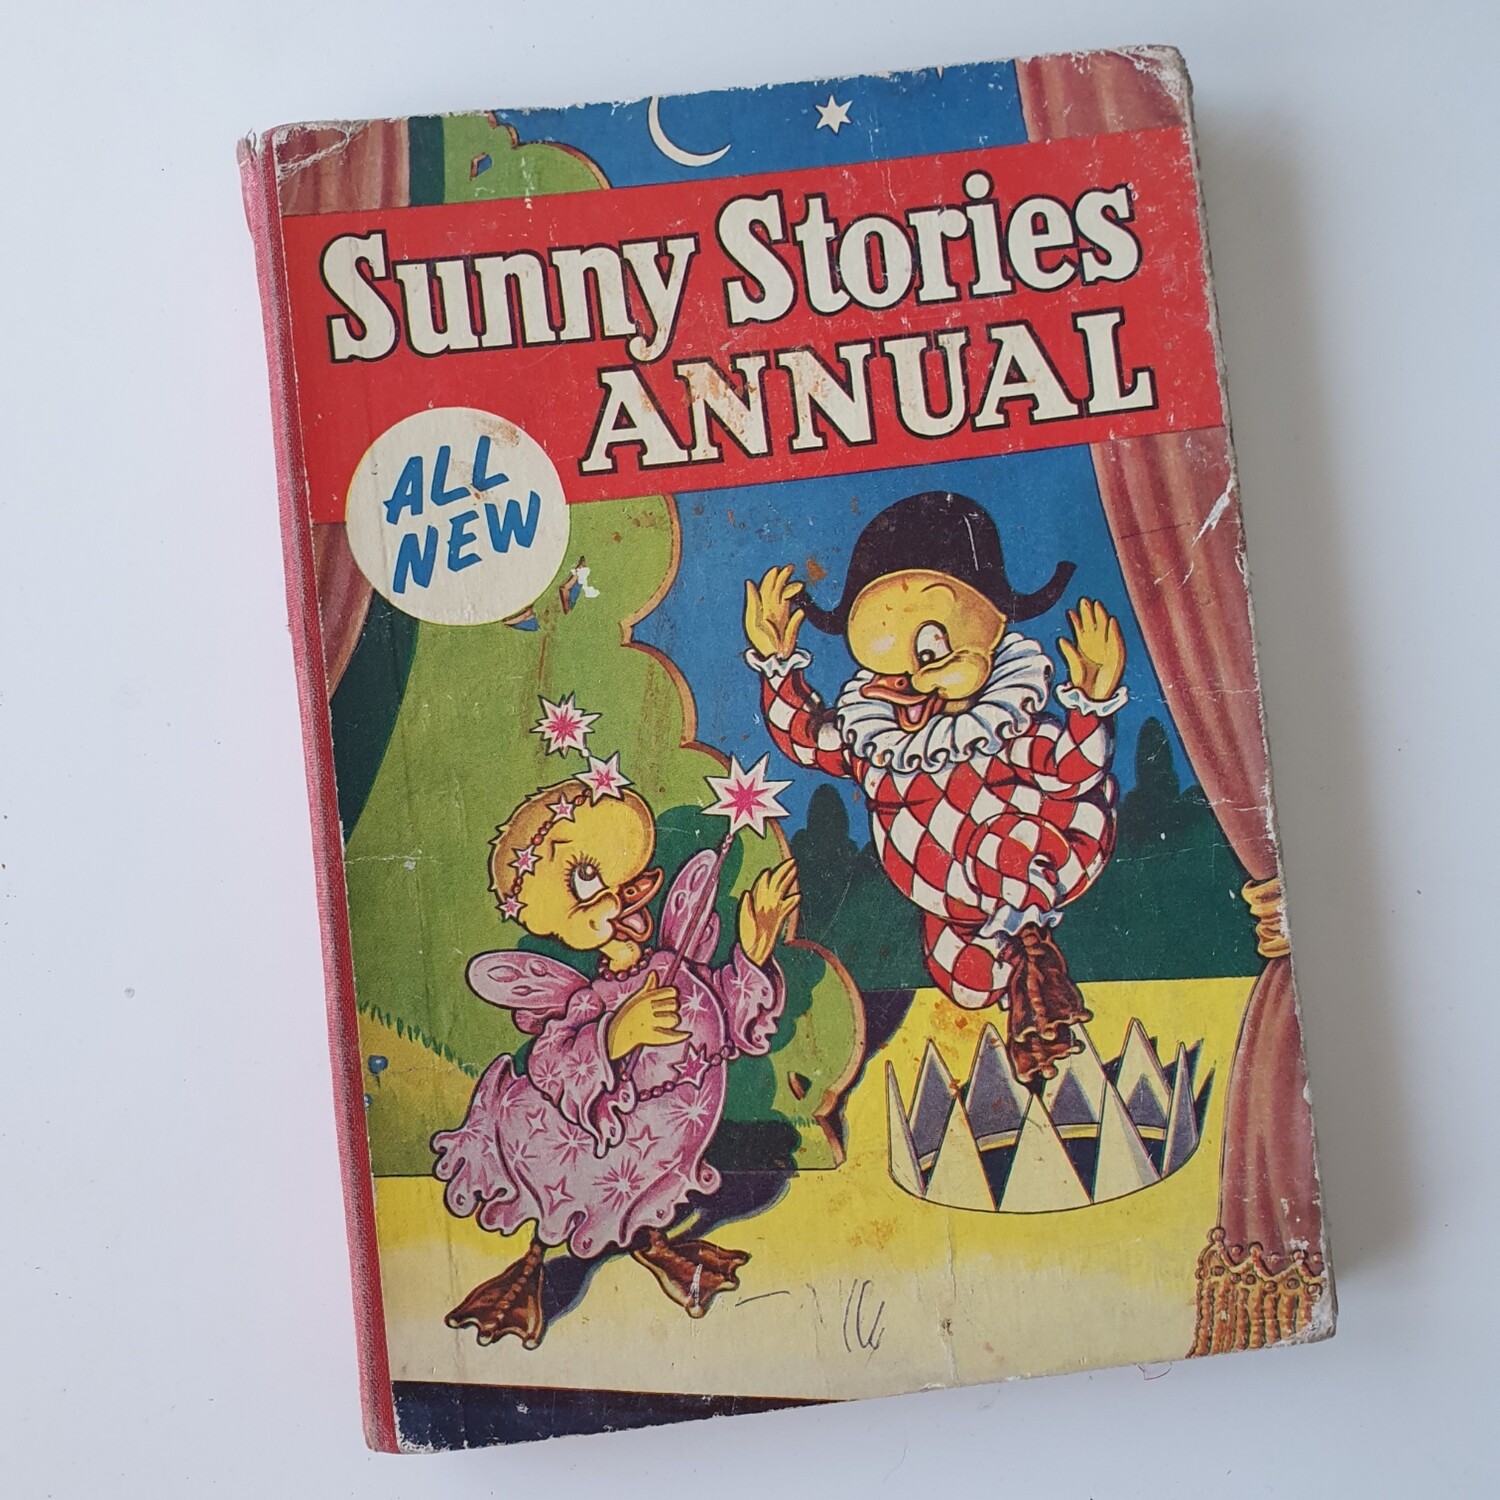 Sunny Stories Annual , ducklings, theatre, plays c. 1950s